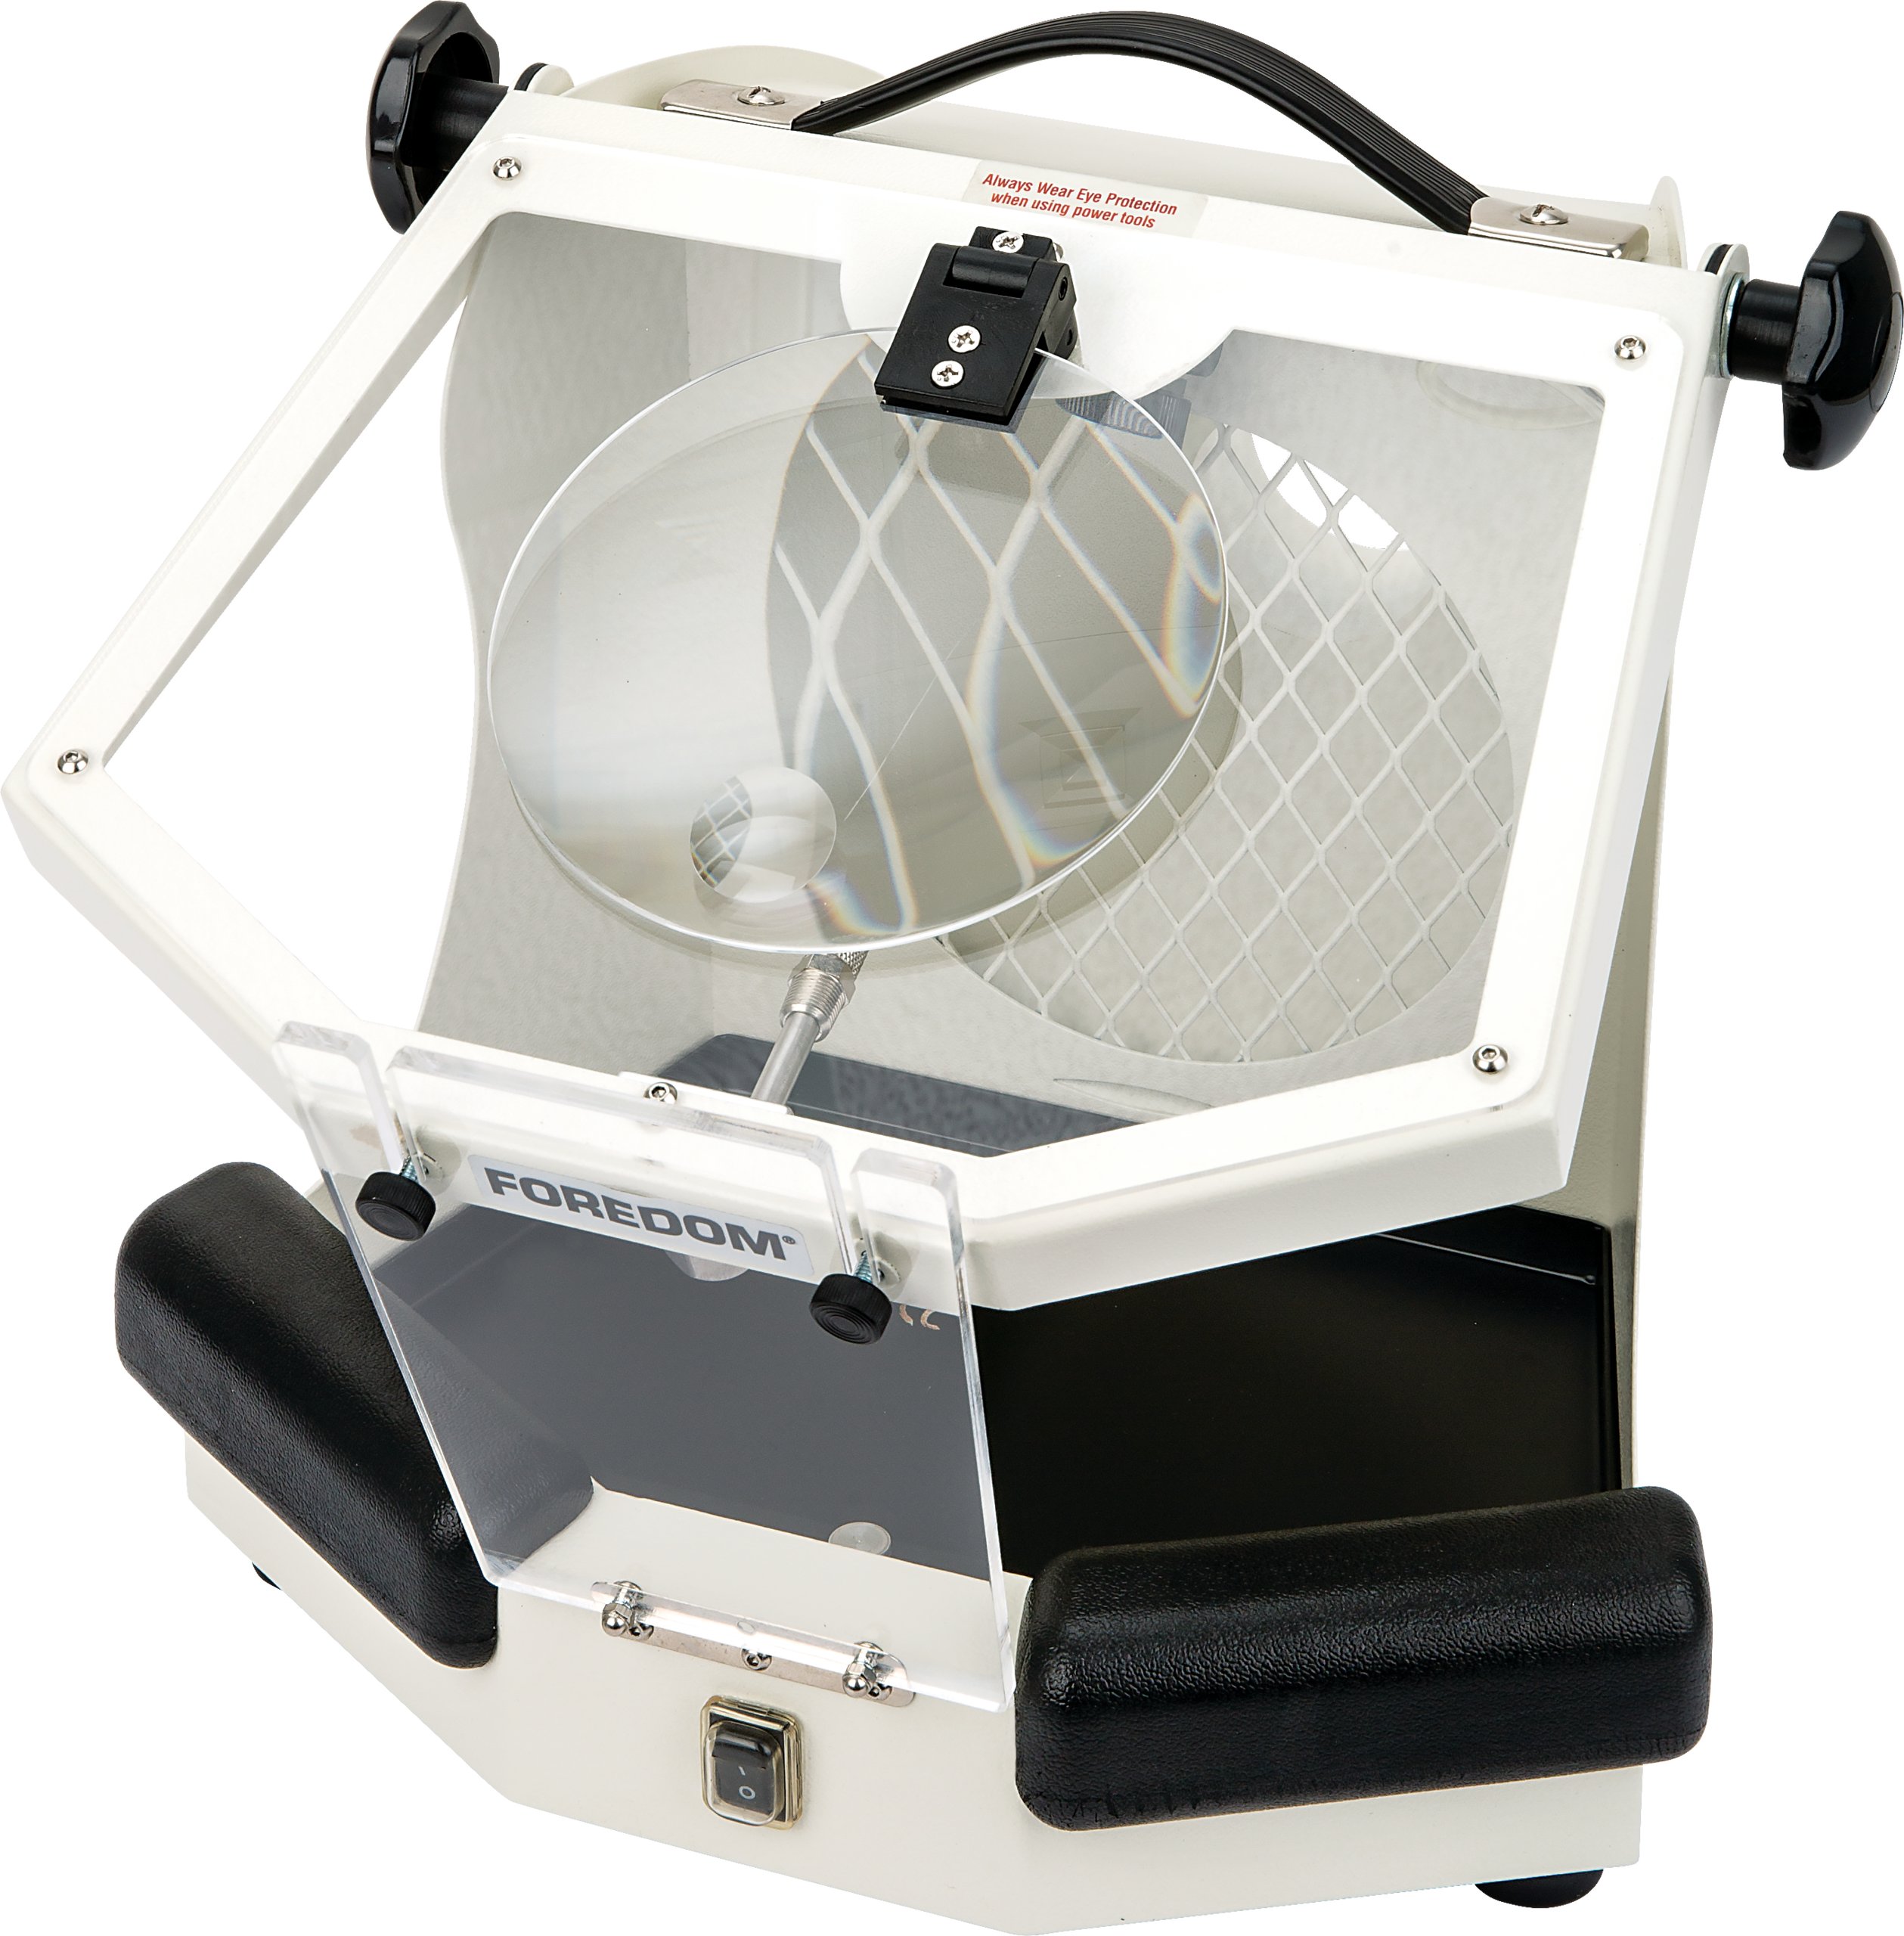 Foredom® Lighted Work Chamber